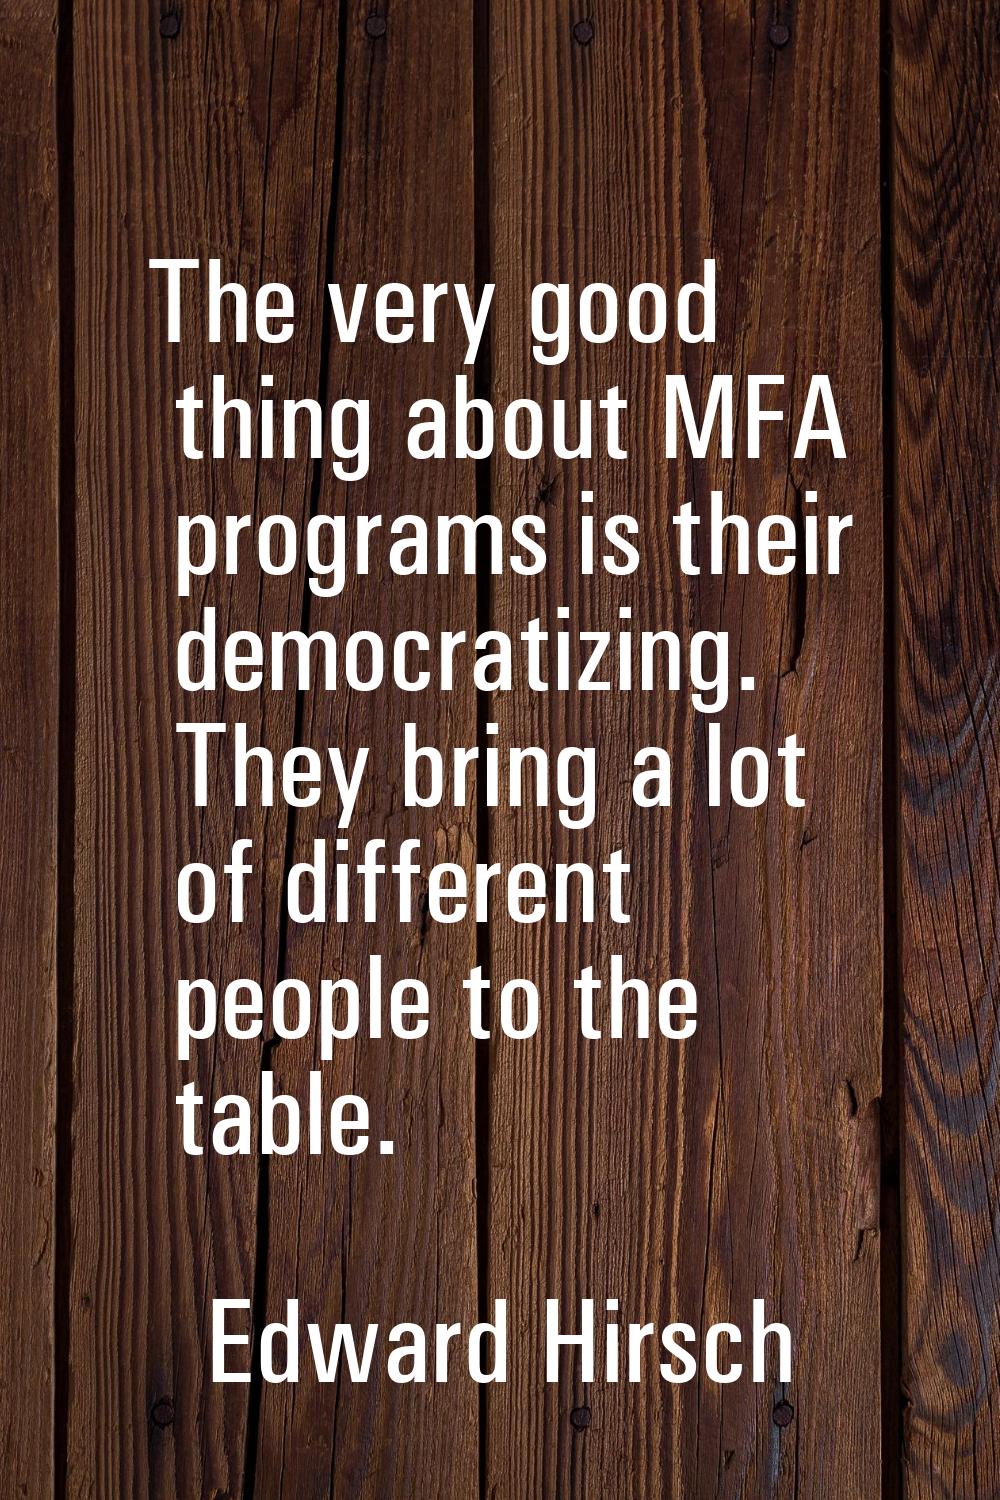 The very good thing about MFA programs is their democratizing. They bring a lot of different people